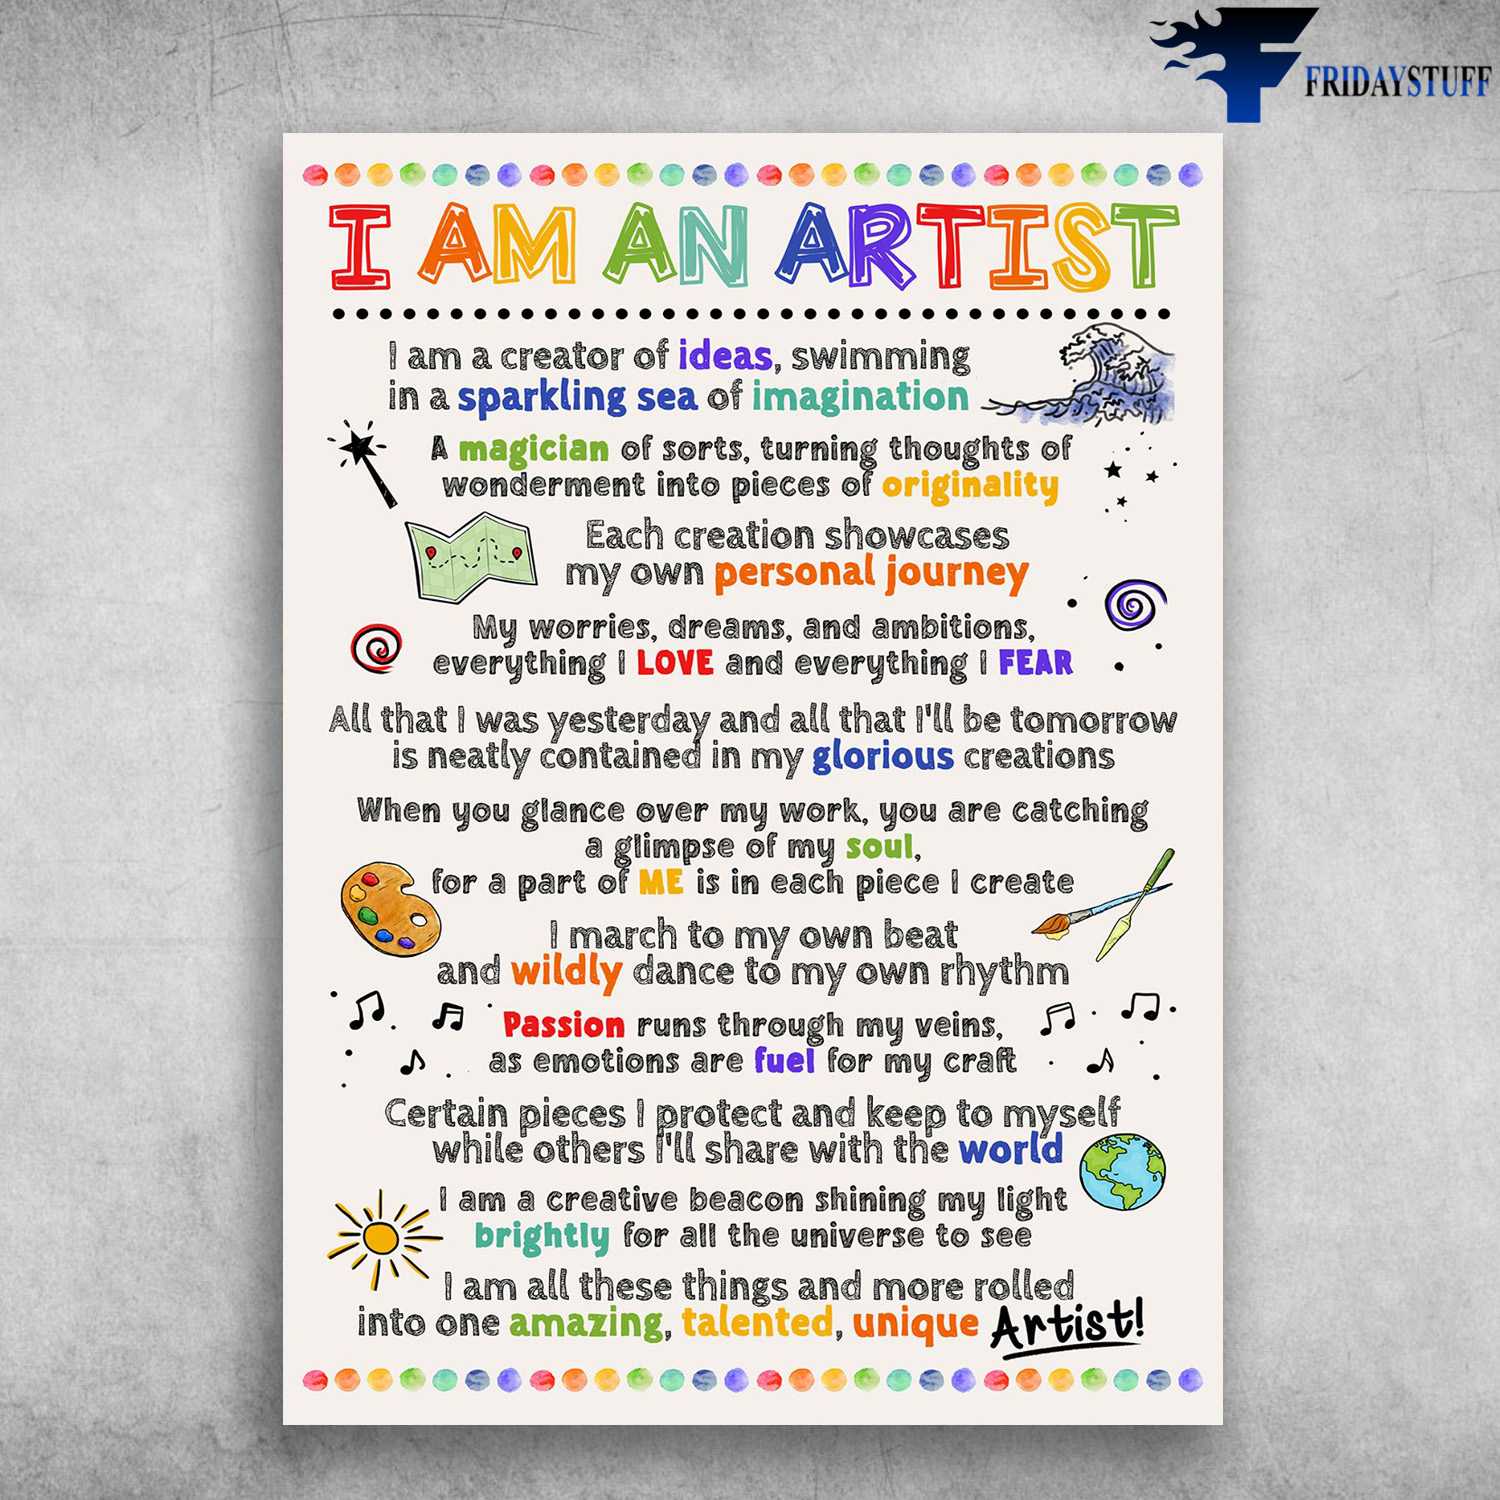 Artist Poster, I Am An Artist, I Am A Creator Of I Dears, Swimming In A Sparkling Sea Of Imagination, A Magician Of Sorts